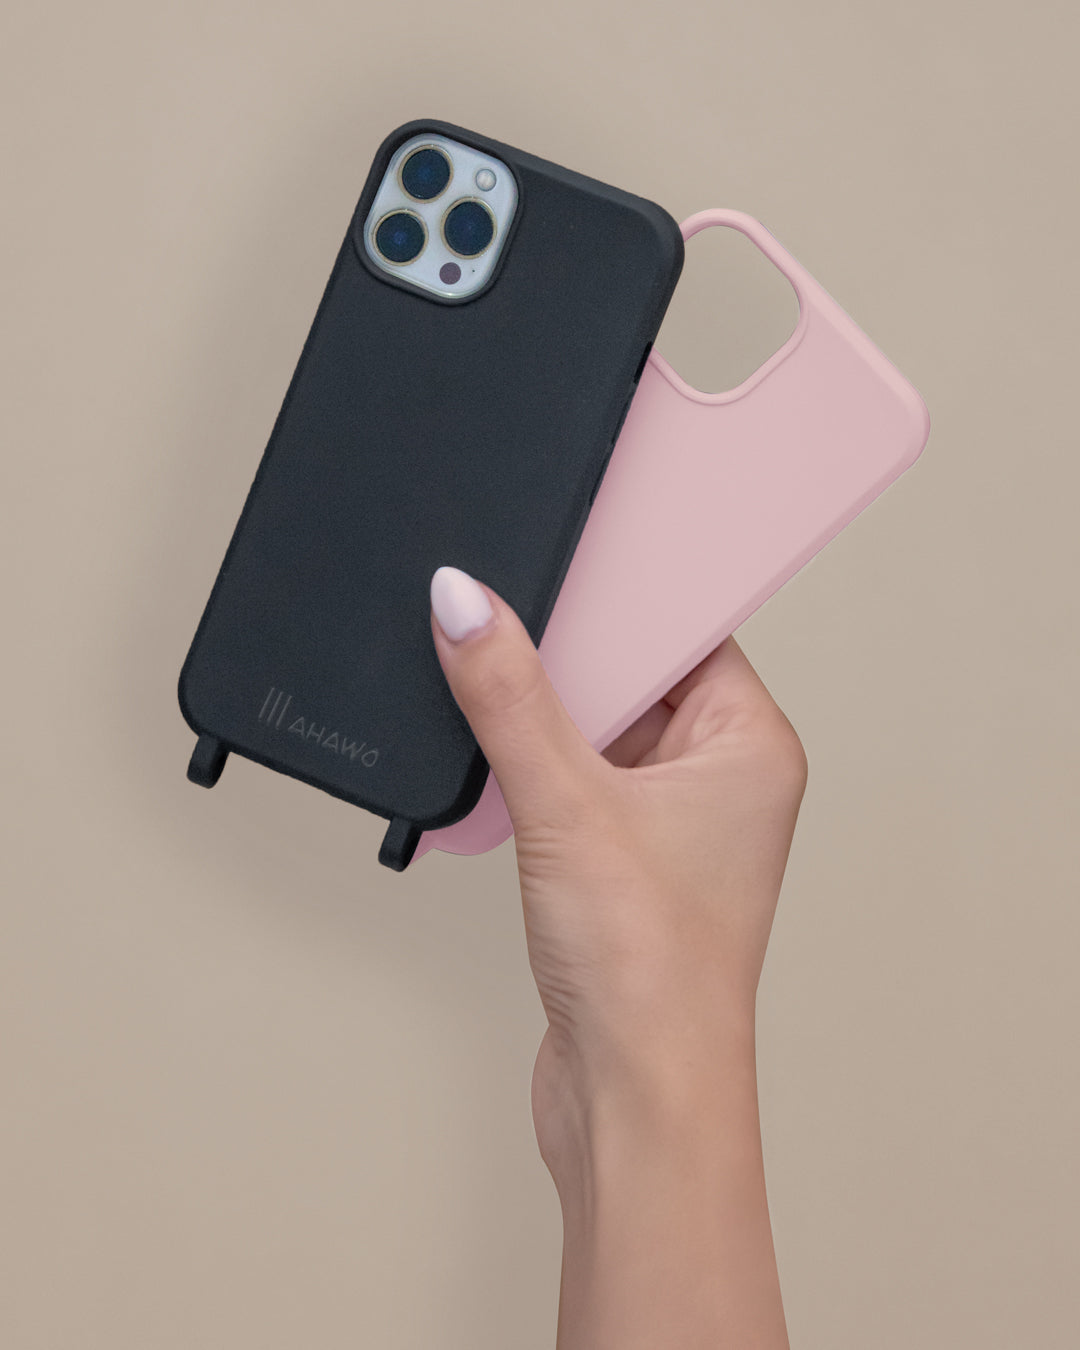 Phone Cases in black and rose, MAHAWO